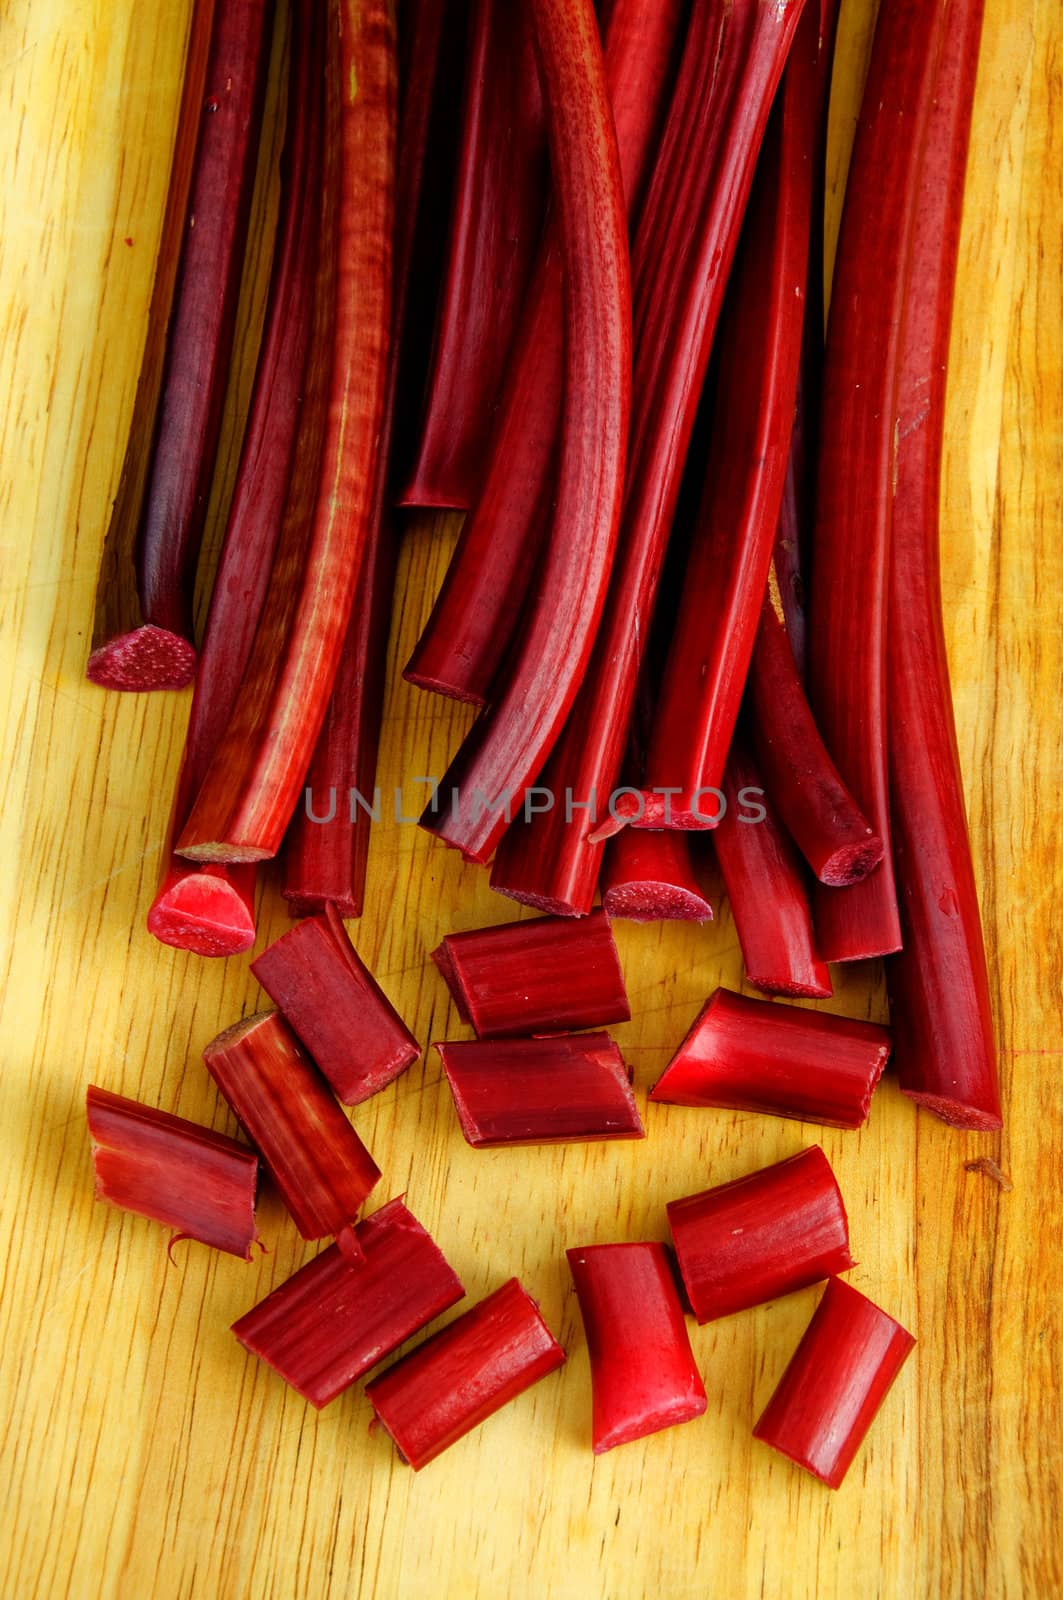 Chopped rhubarb on a wooden plate
